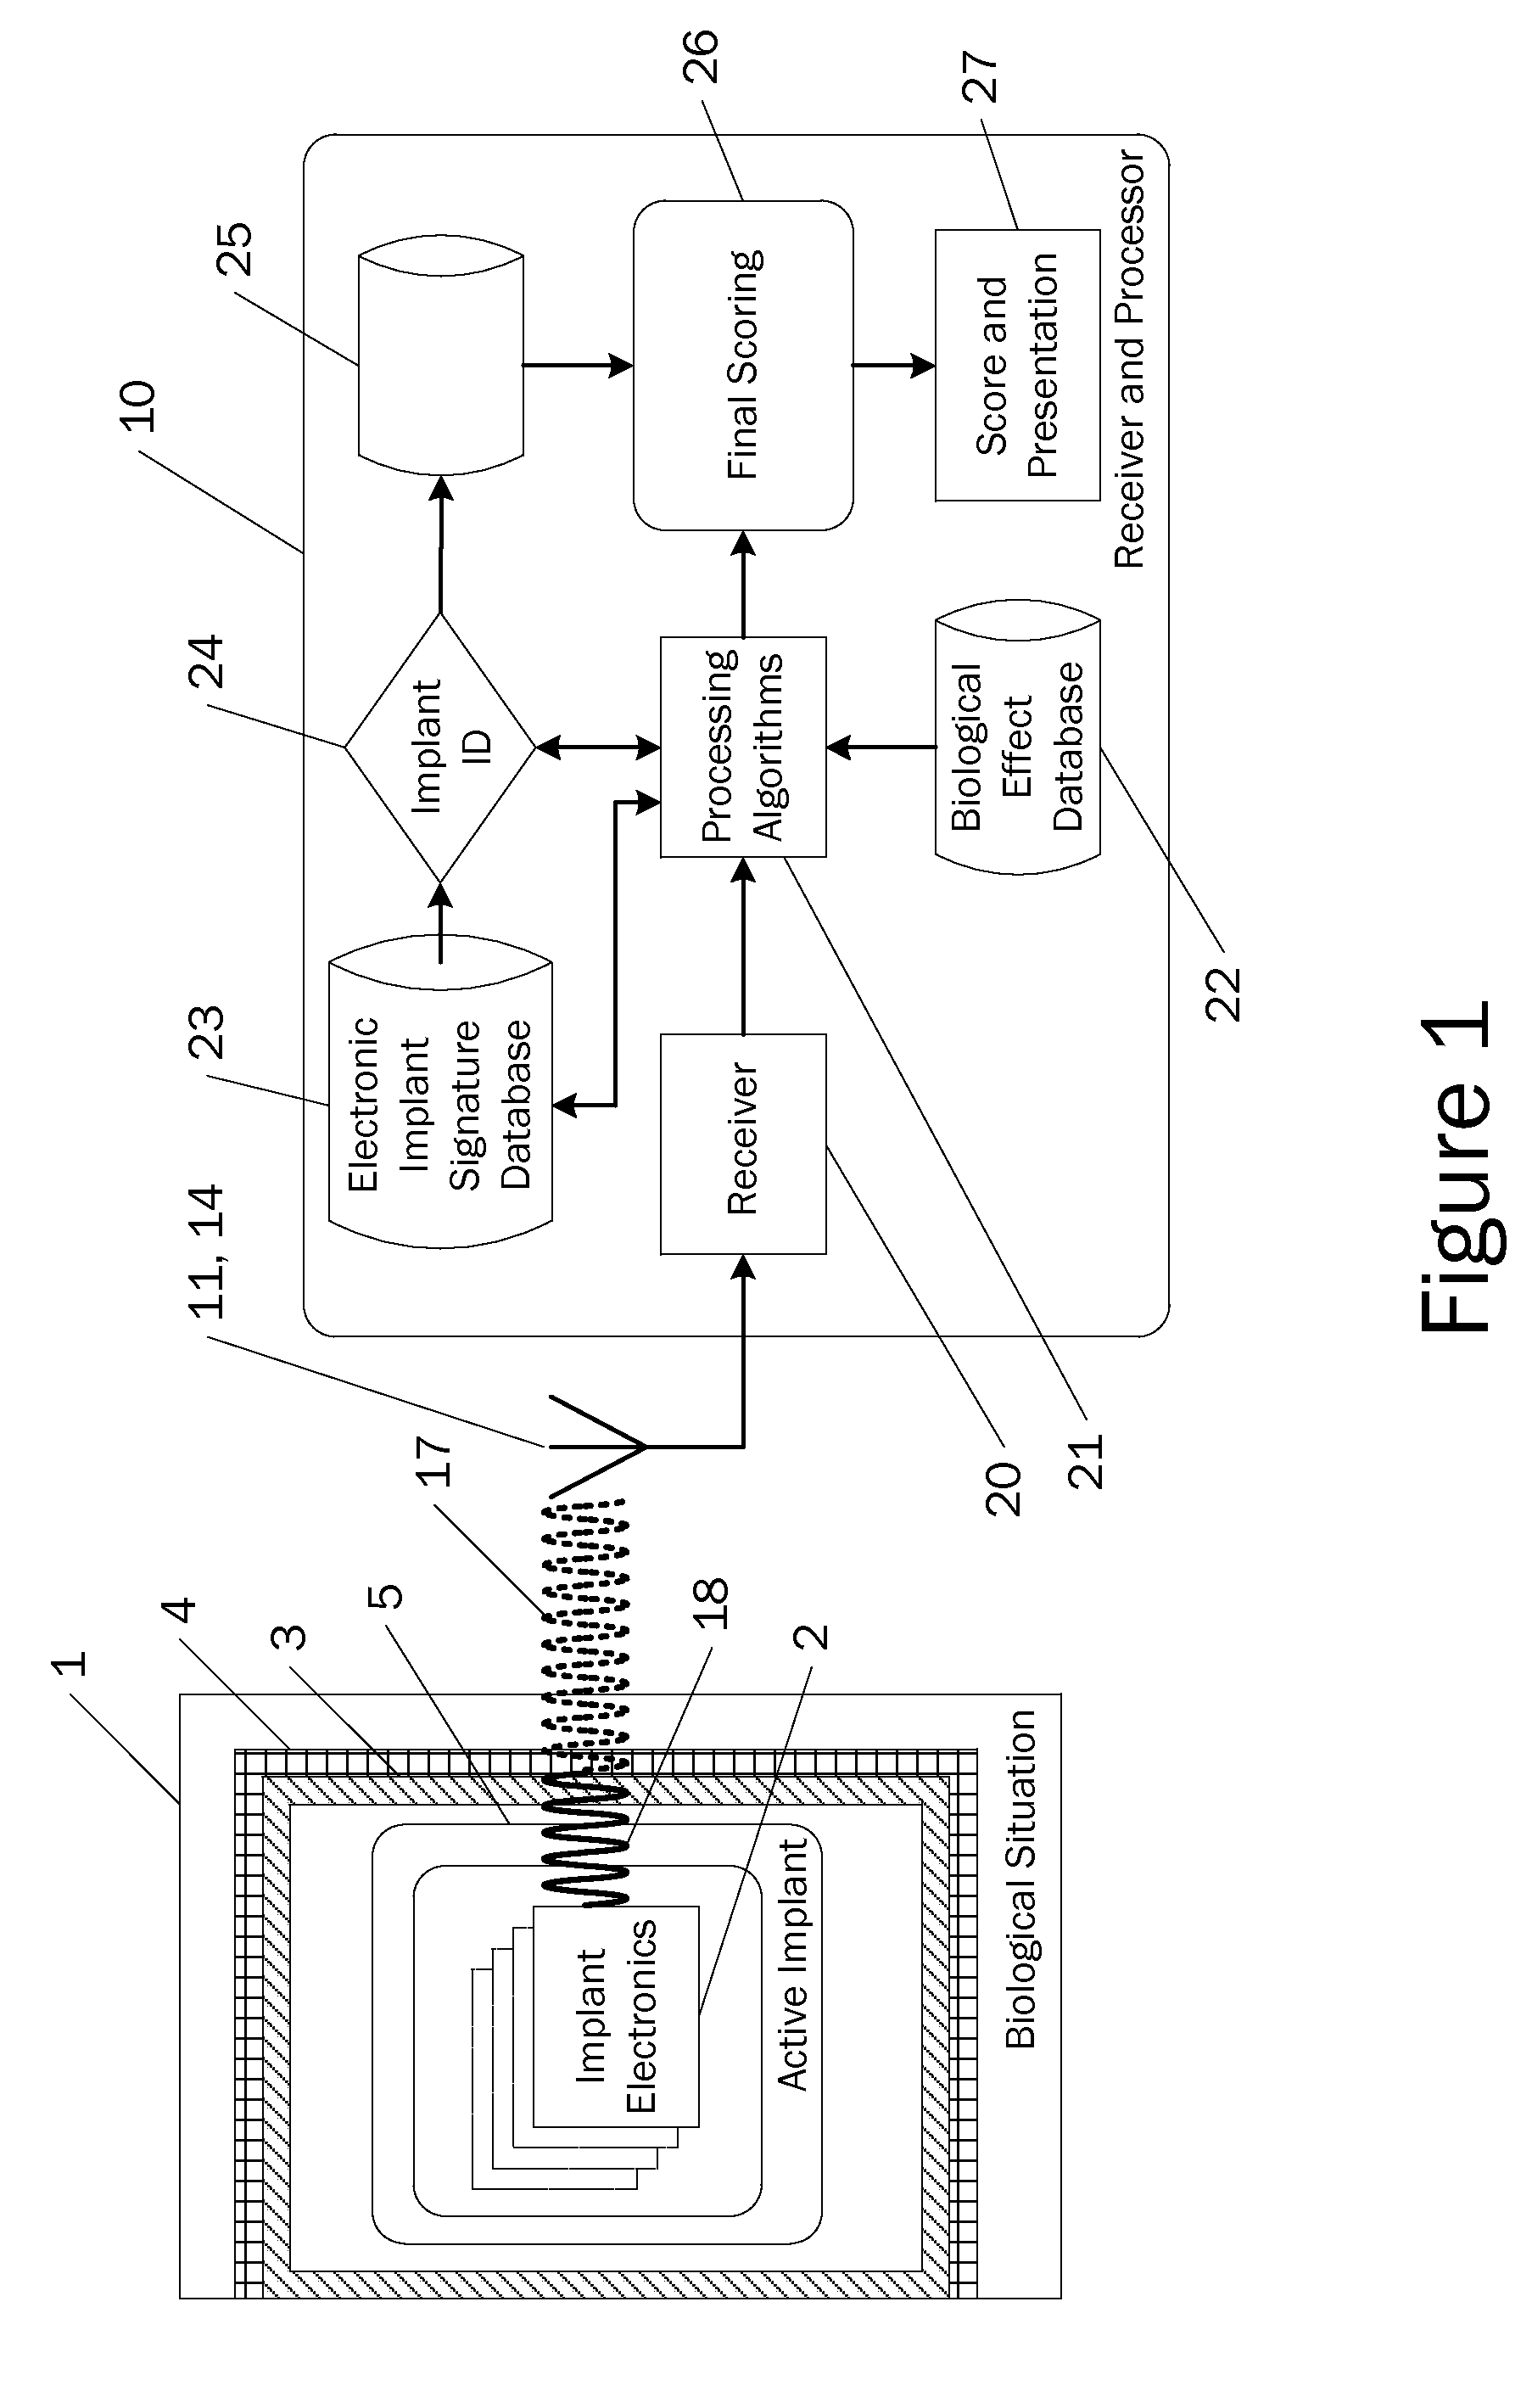 Method and apparatus for the diagnosis and prognosis of active implants in or attached to biological hosts or systems